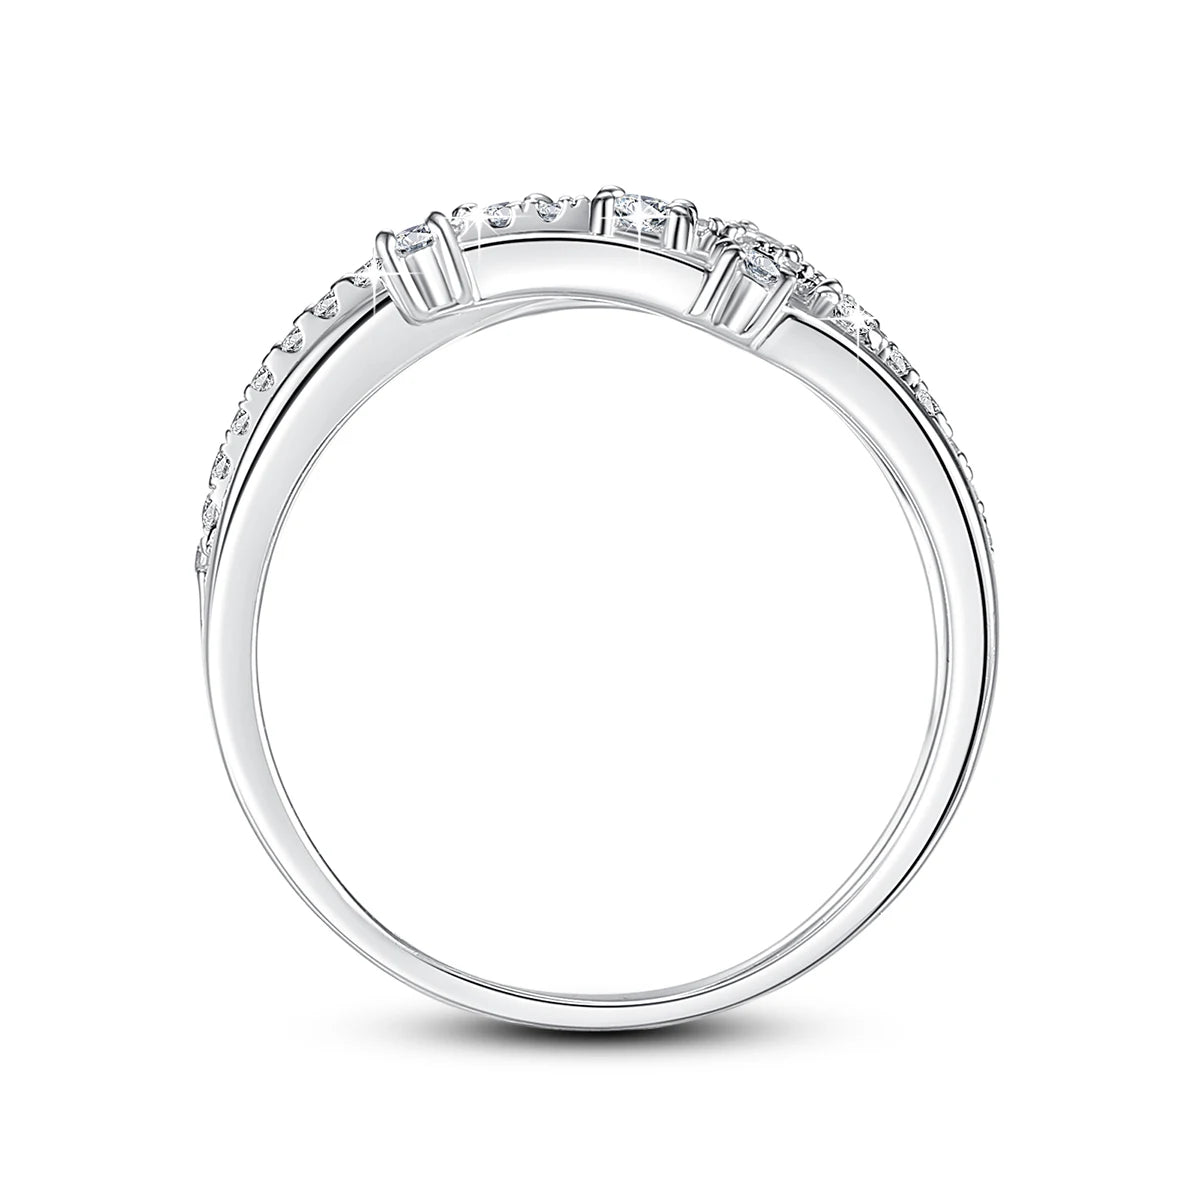 A close-up of a Szjinao Trendy Moissanite Ring Eternity Wedding Band Solid 925 Silver Rings For Women Jewelry Engagement Gift Dropship Supplier by Maramalive™ with a row of small diamonds along the top half, perfect for a wedding band.